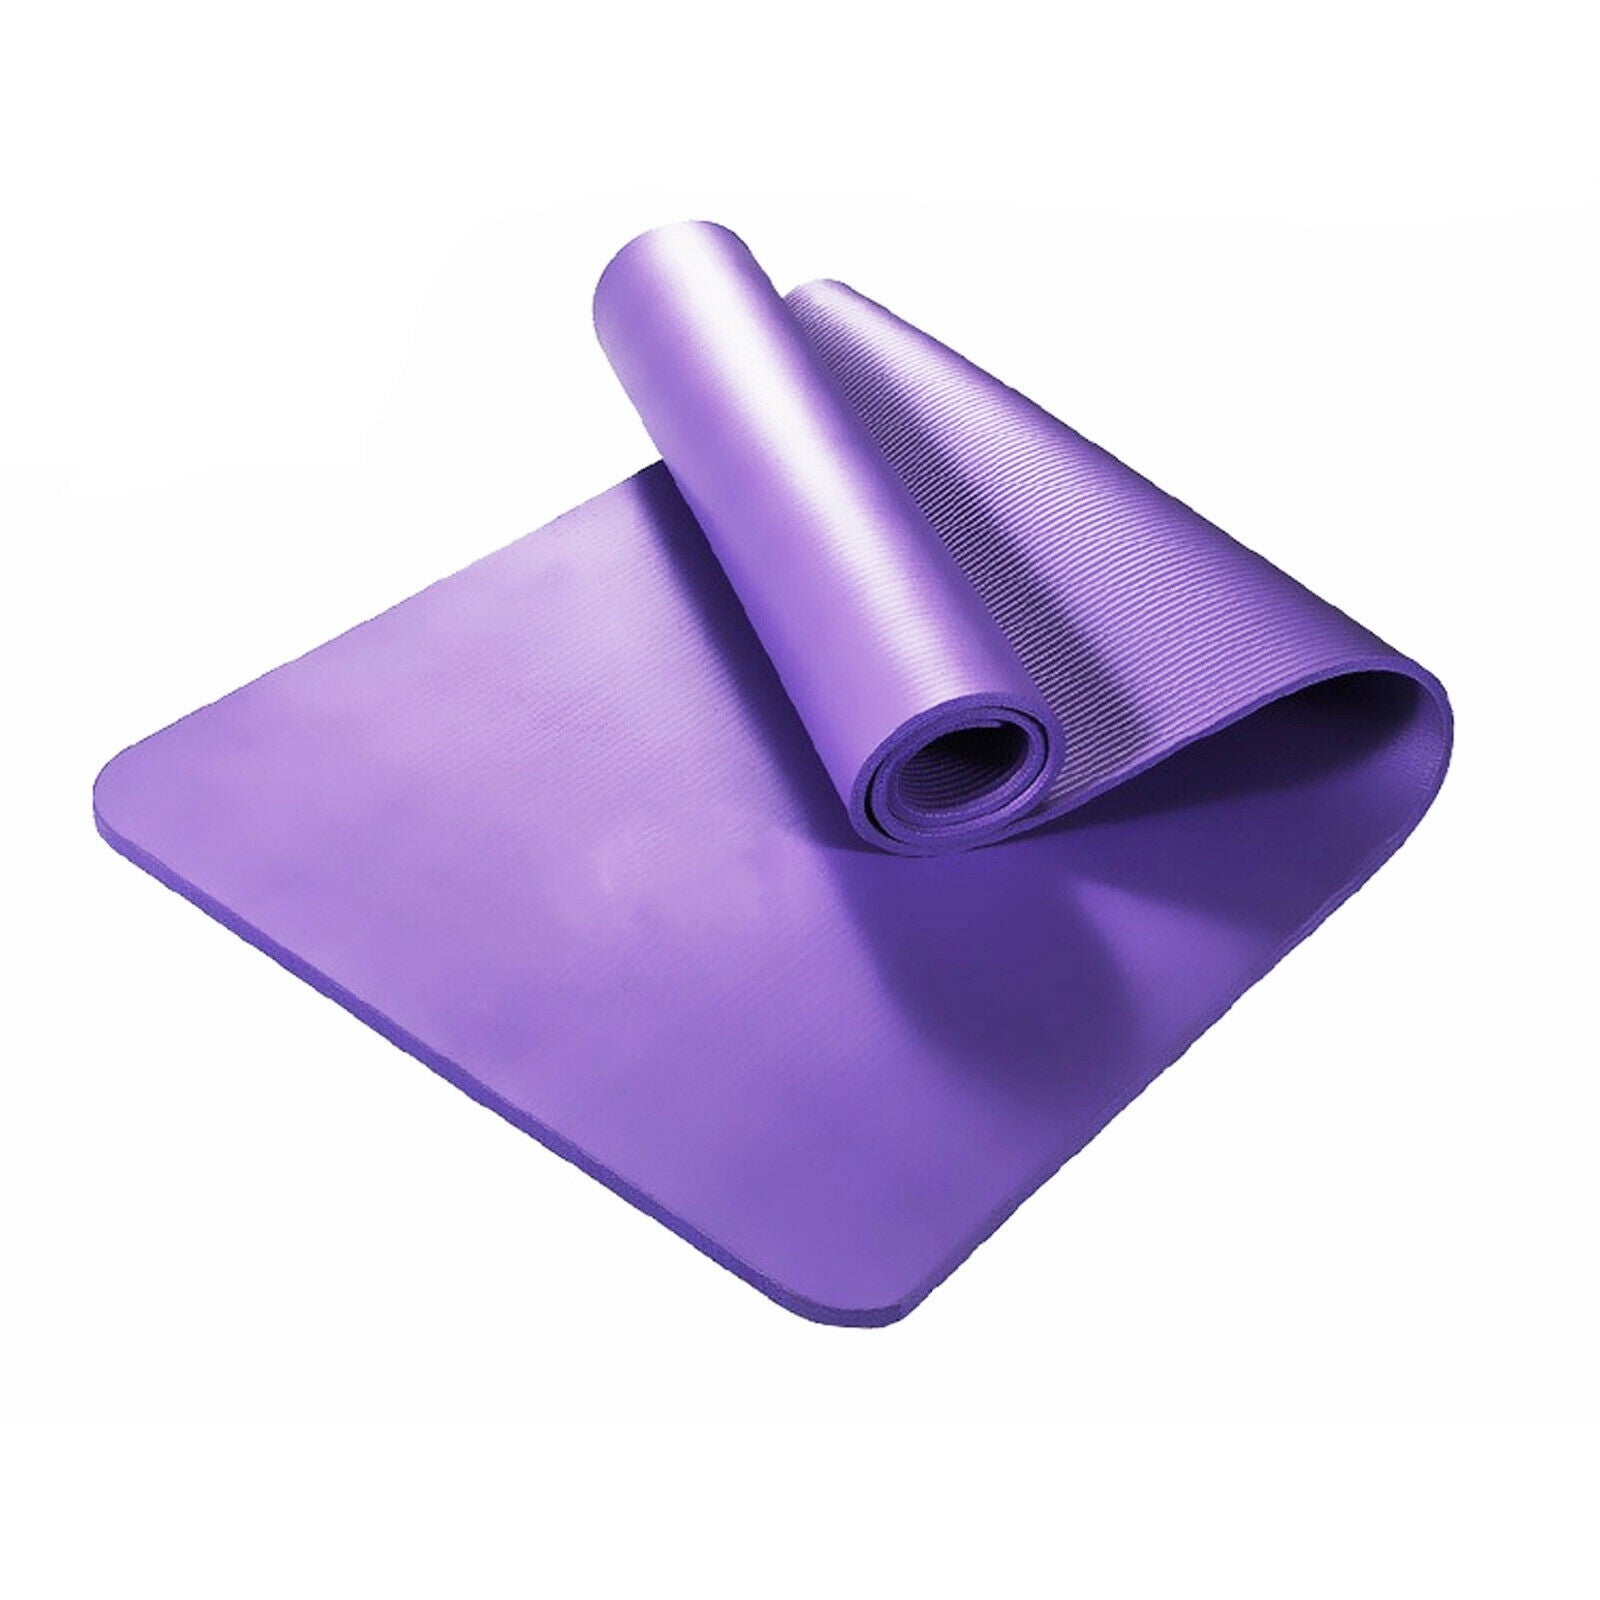 MASON TAYLOR 20MM NBR Thick Pad Nonslip Yoga Mat Exercise Fitness Home Gym - Purple